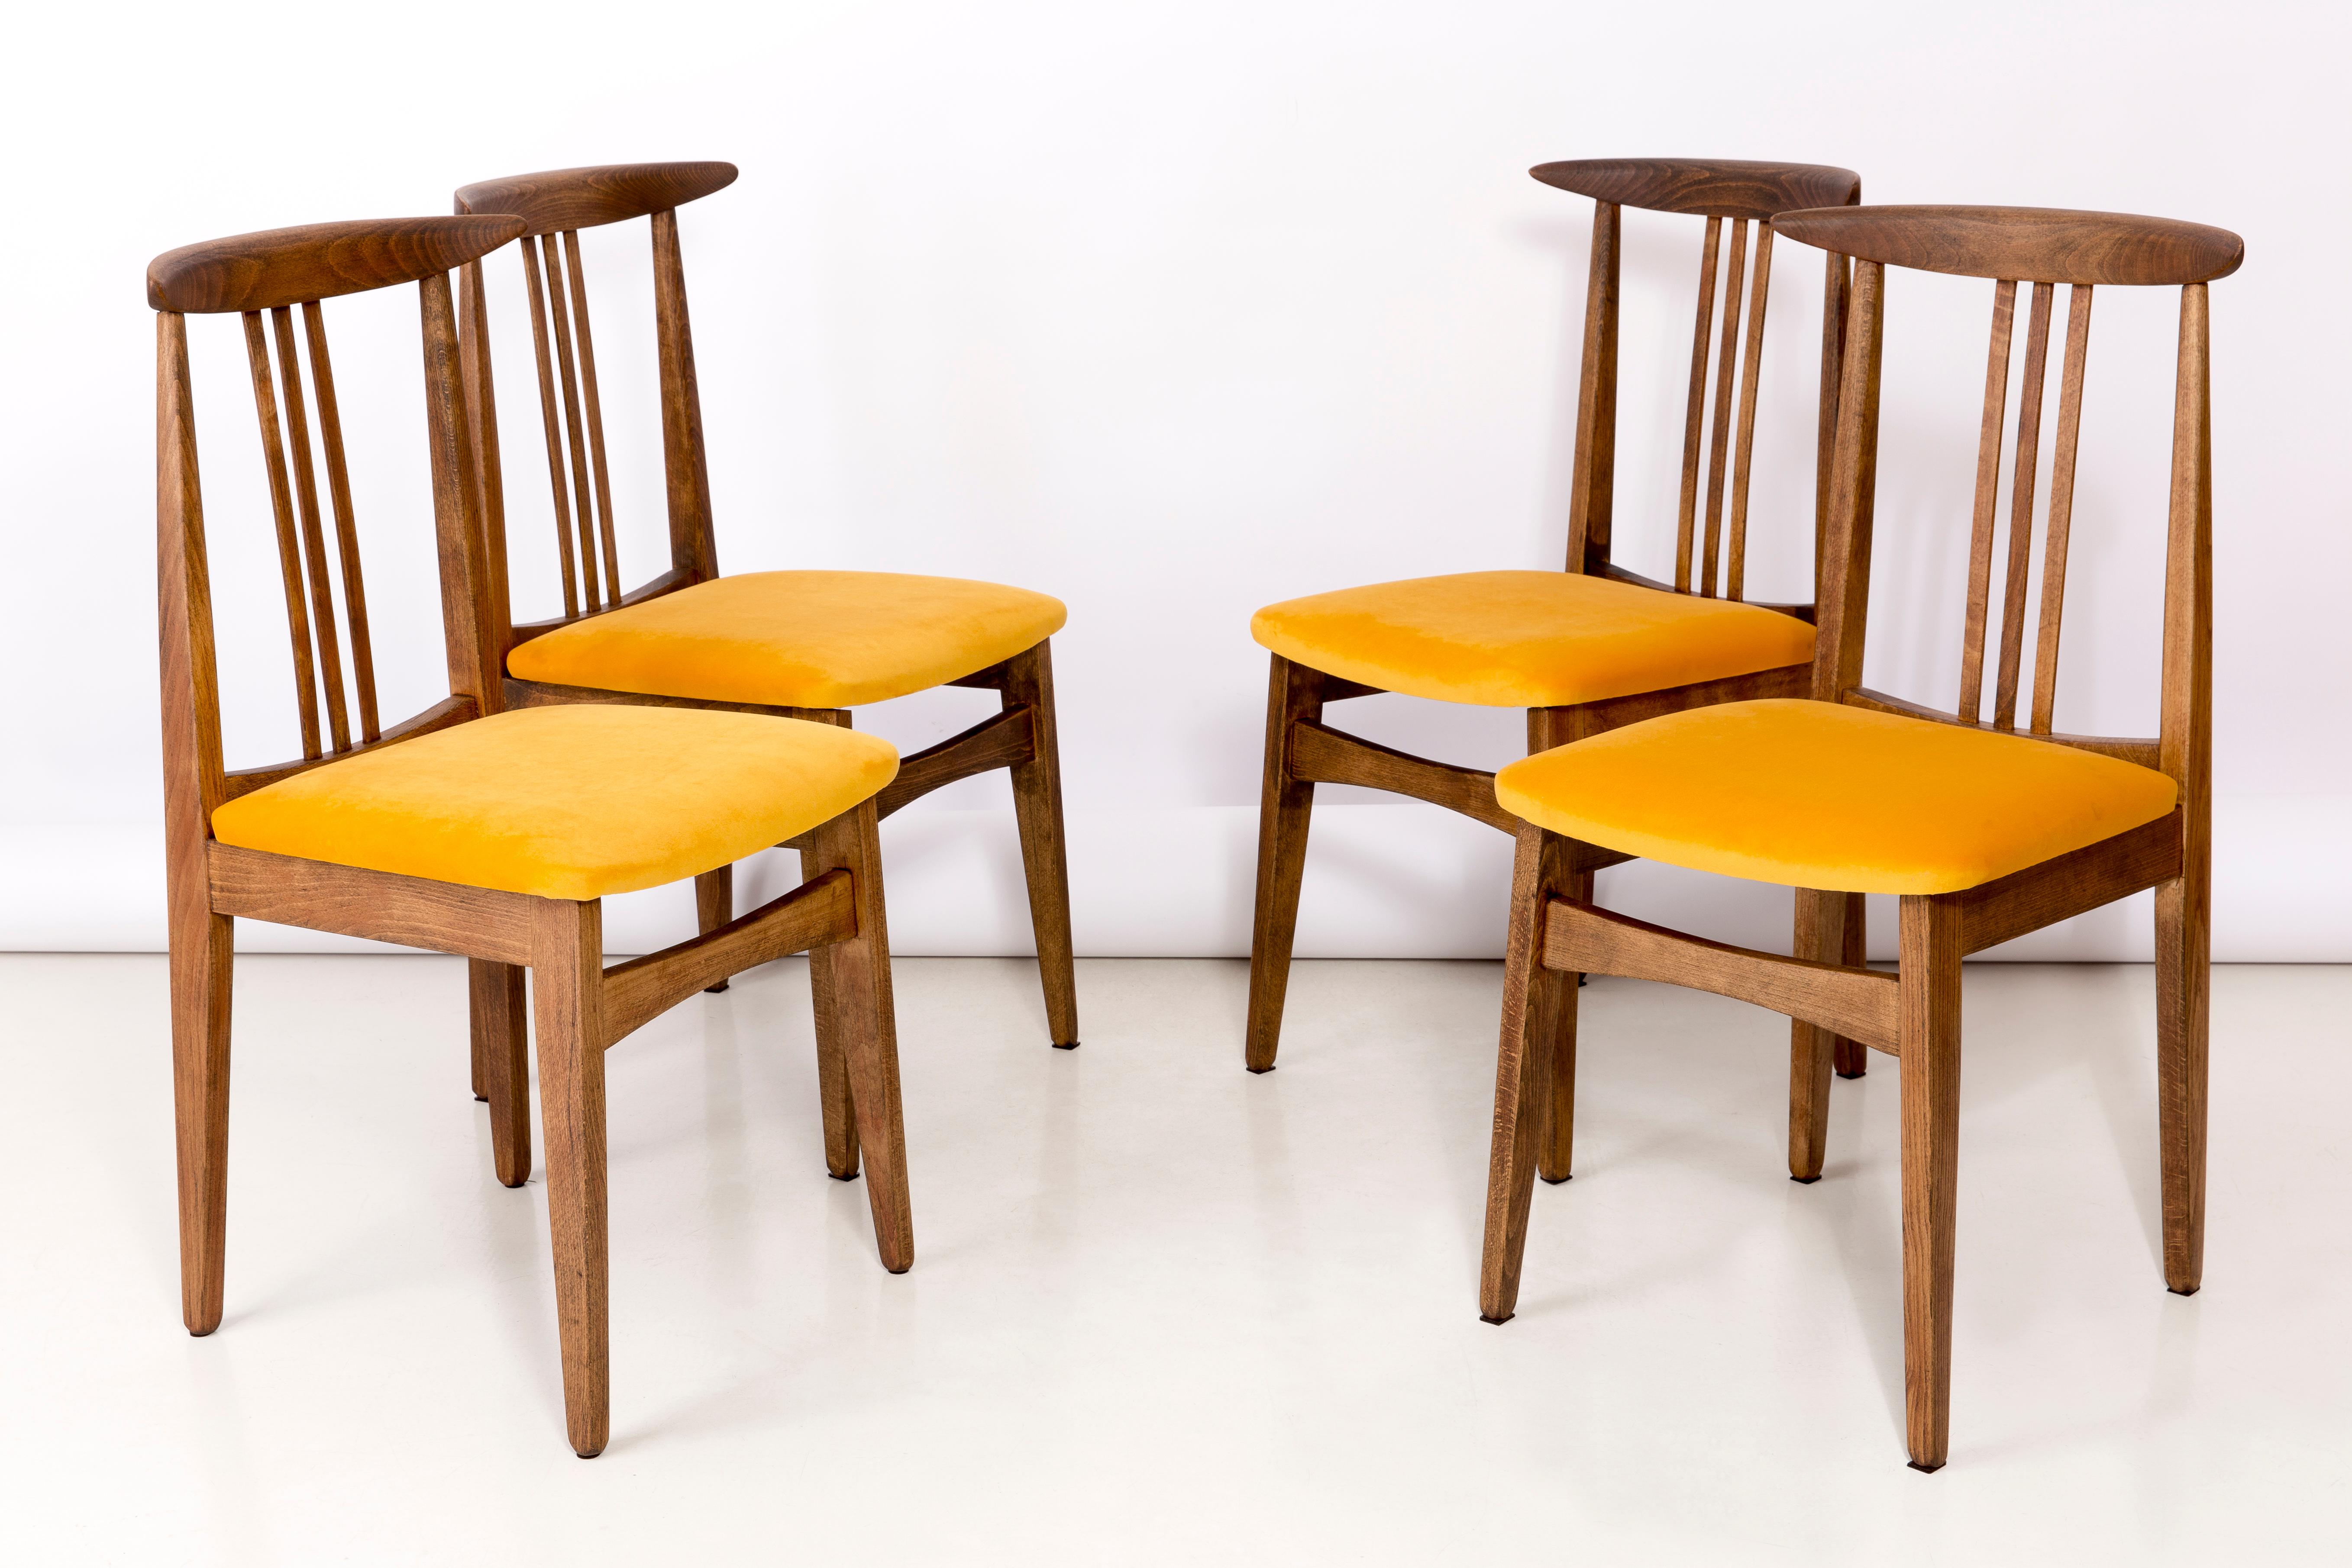 Set of eight beech chairs designed by M. Zielinski, type 200 / 100B. Manufactured by the Opole Furniture Industry Center at the end of the 1960s in Poland. The chairs have undergone a complete carpentry and upholstery renovation. Seats covered with